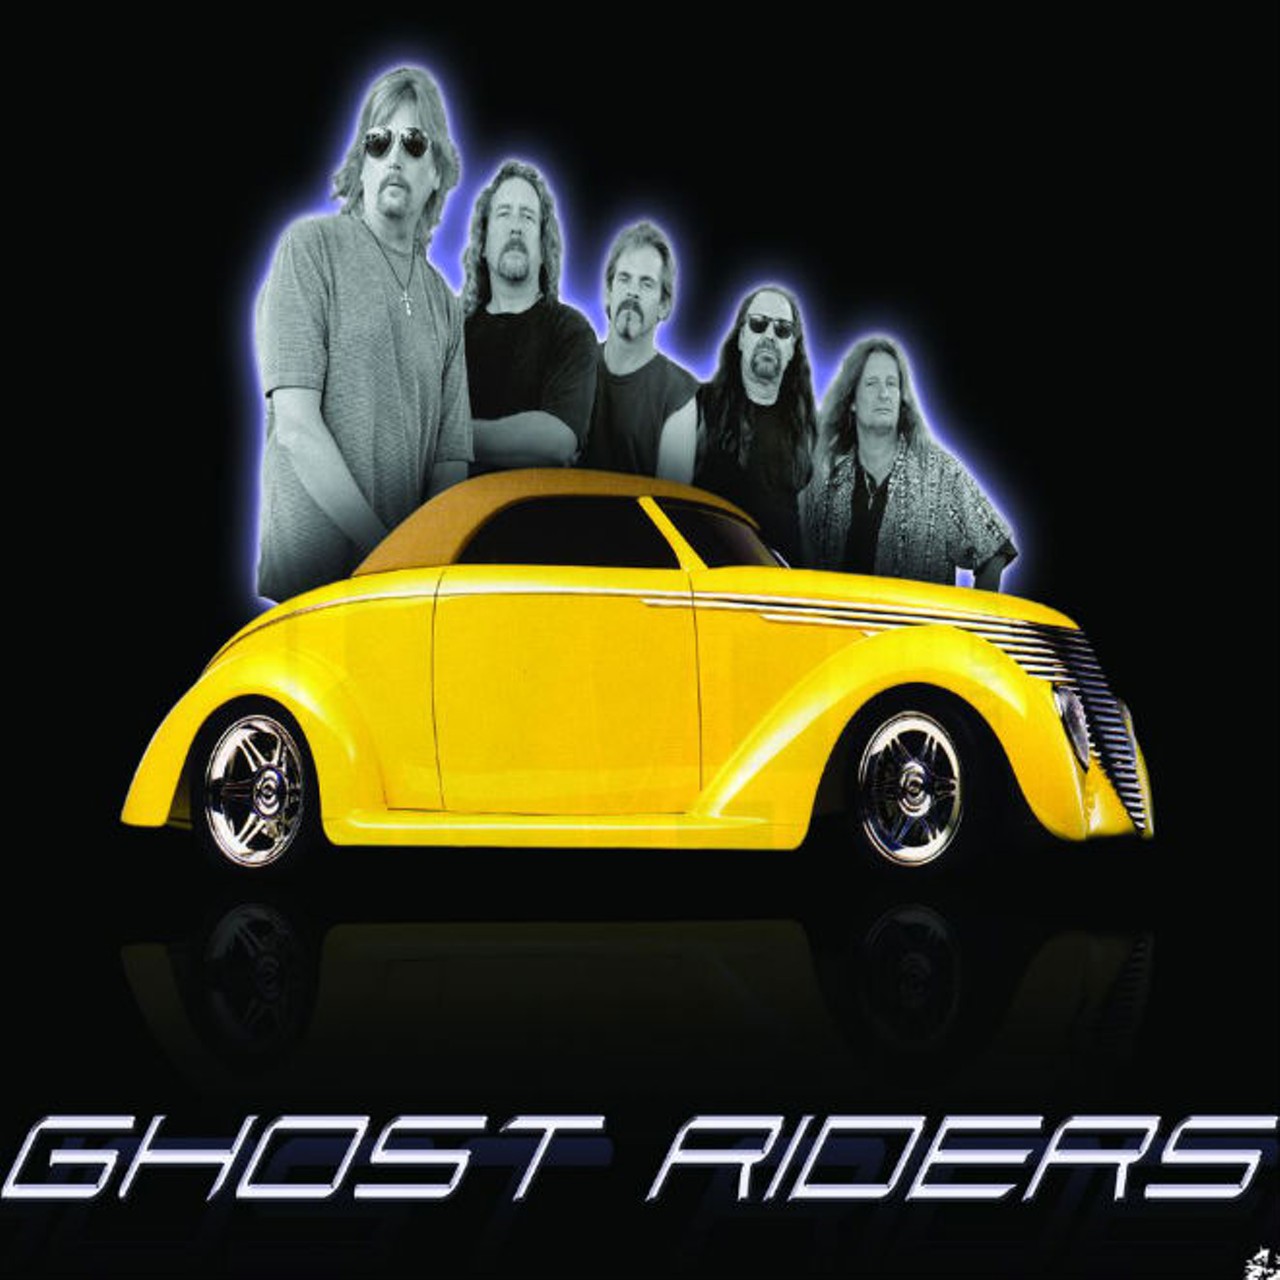 Saturday, May 24Hot Rods and Rock 'n' Roll Car Show and ConcertHot rods and all-star rock band The Ghost Riders.